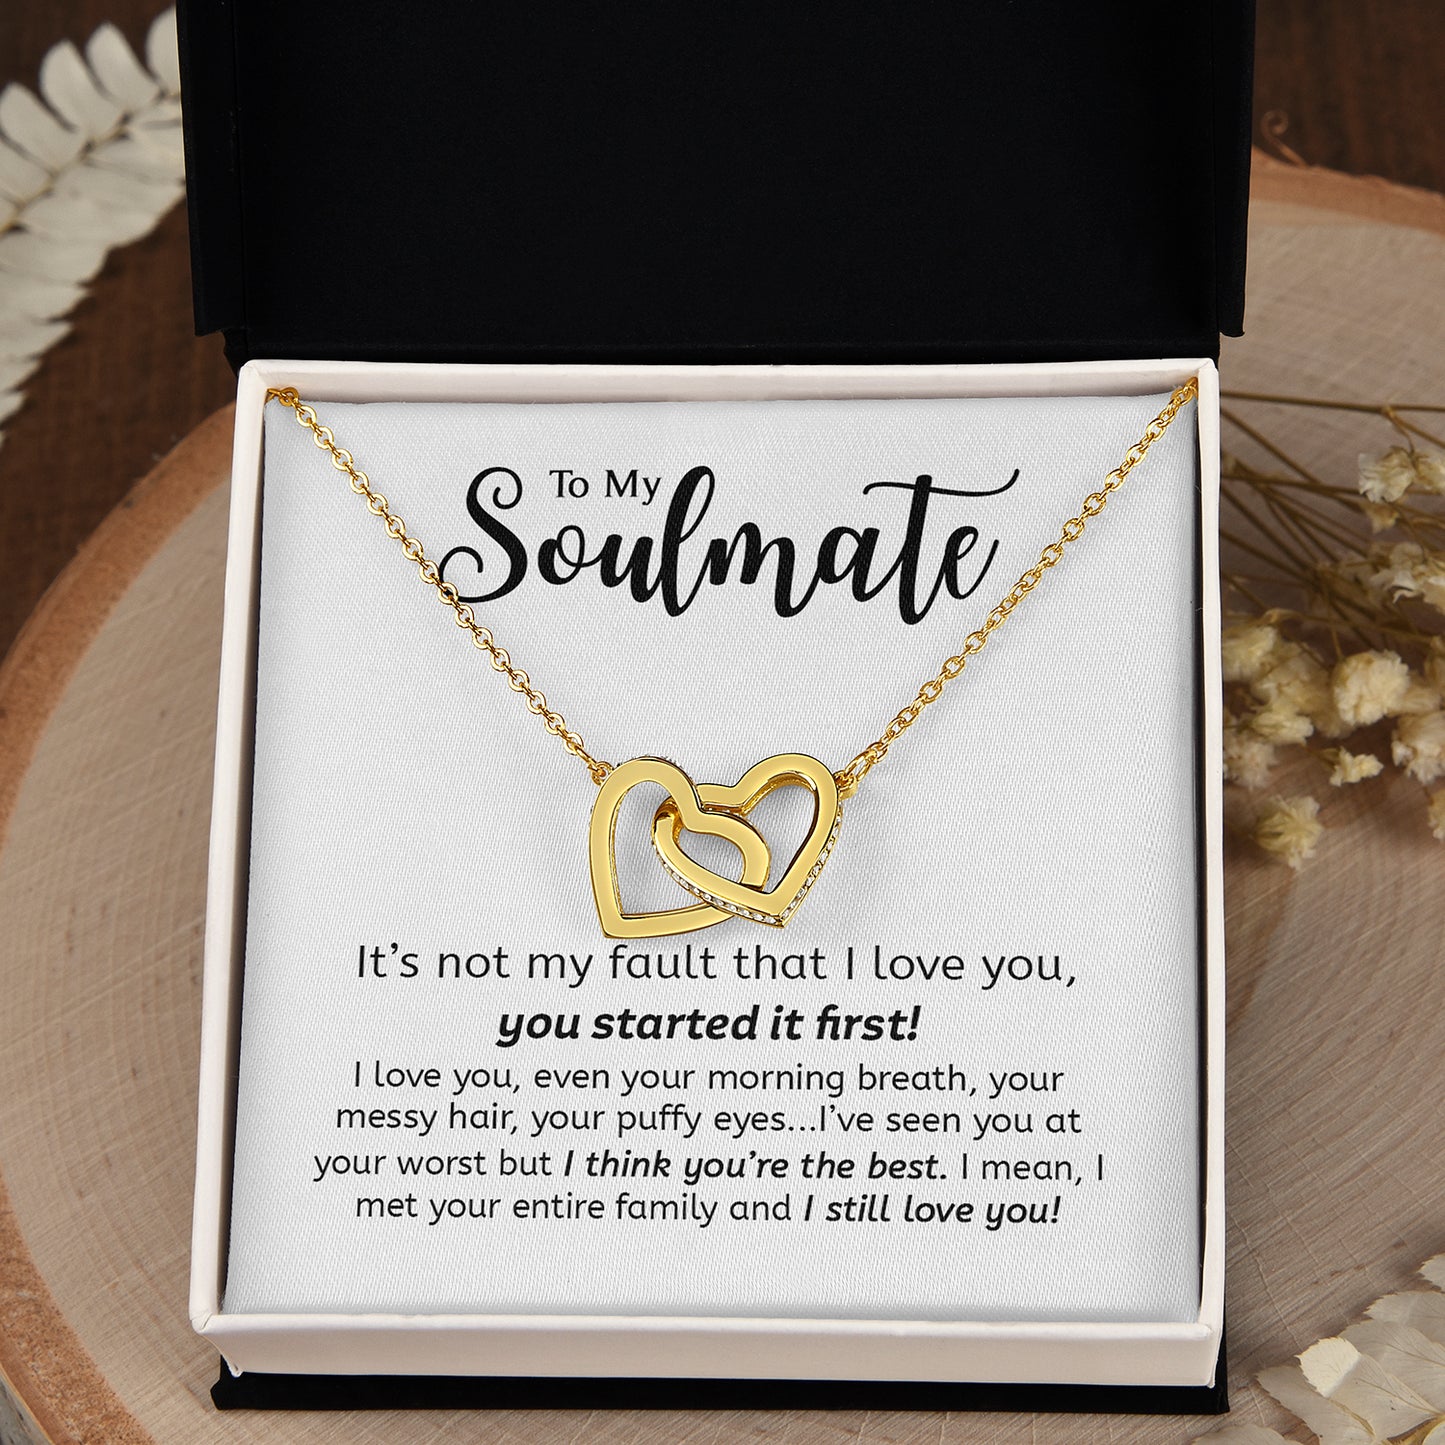 To My Soulmate | You Started It First | Gift For Your Soulmate | Interlocking Hearts necklace